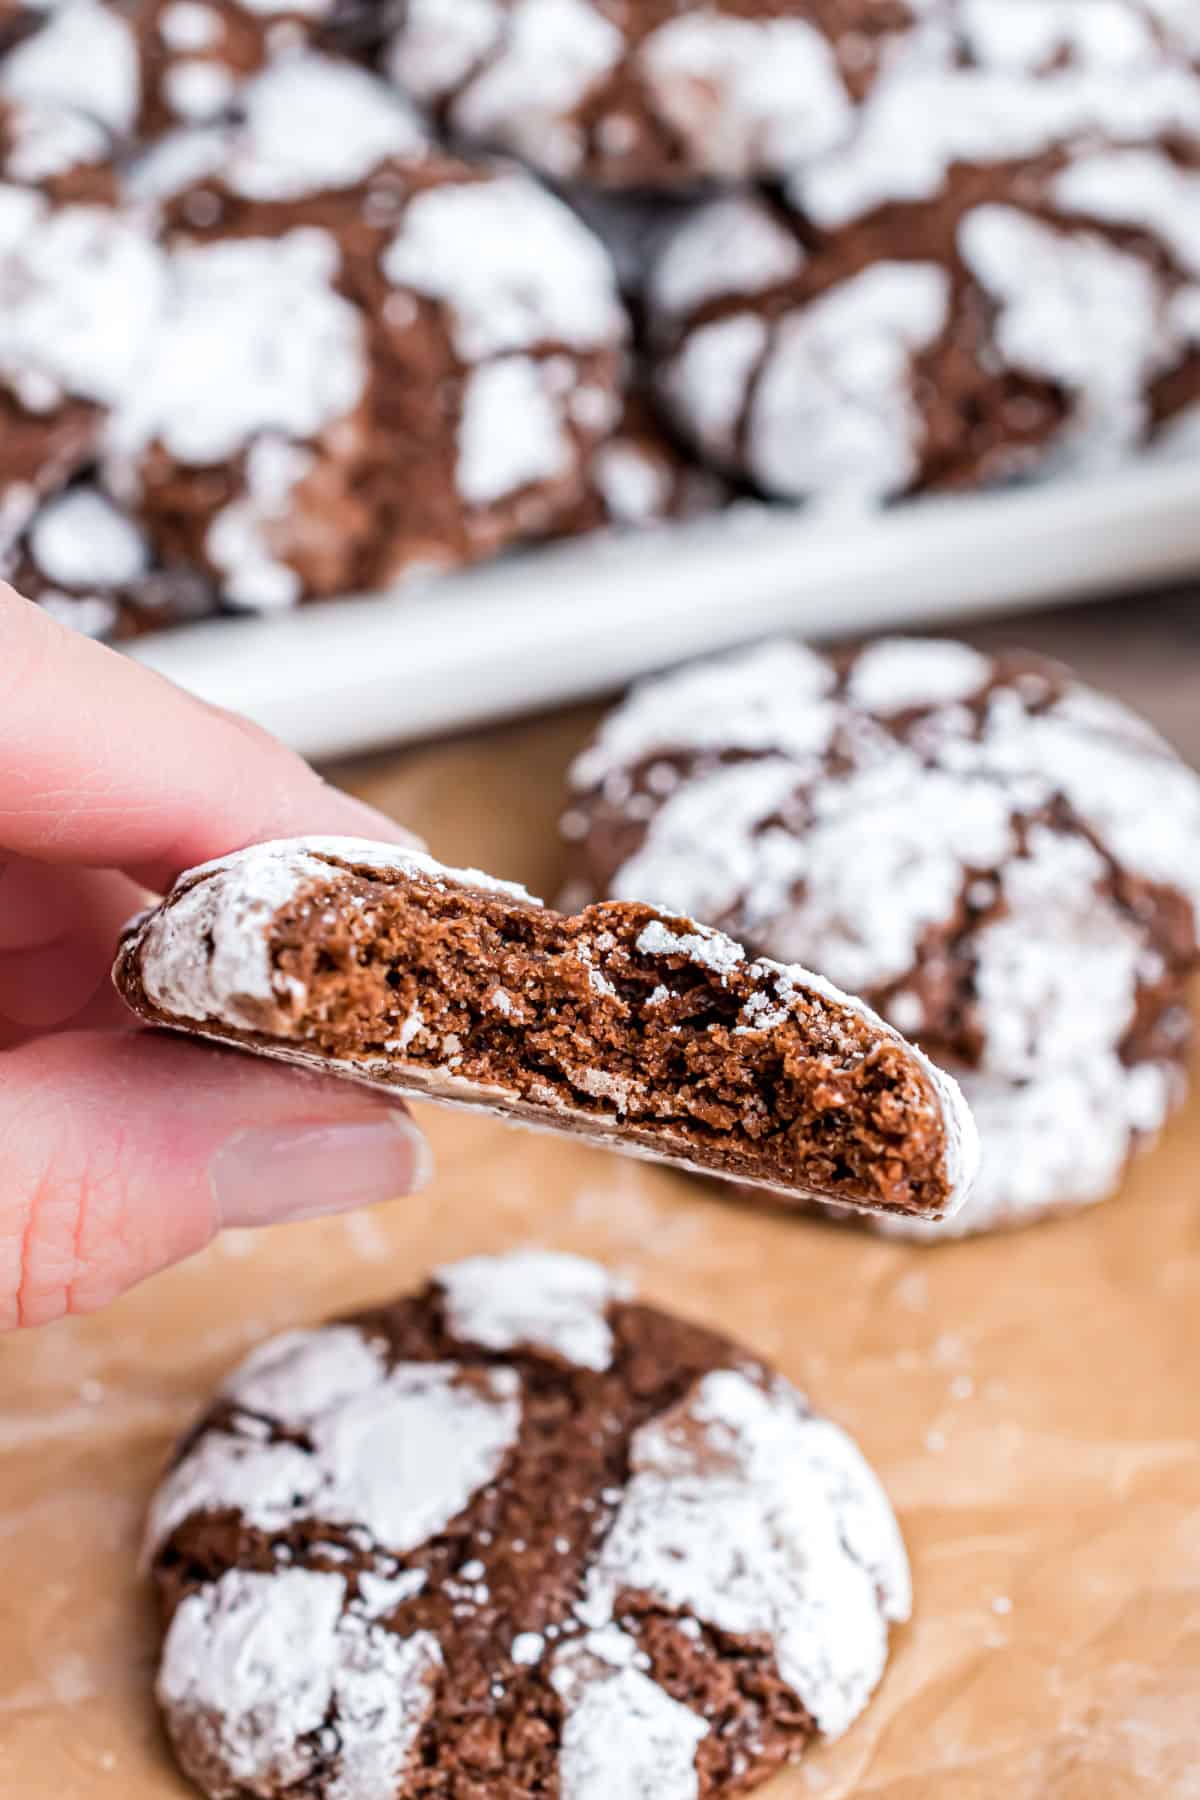 Chocolate crinkle cookies with a bite taken.